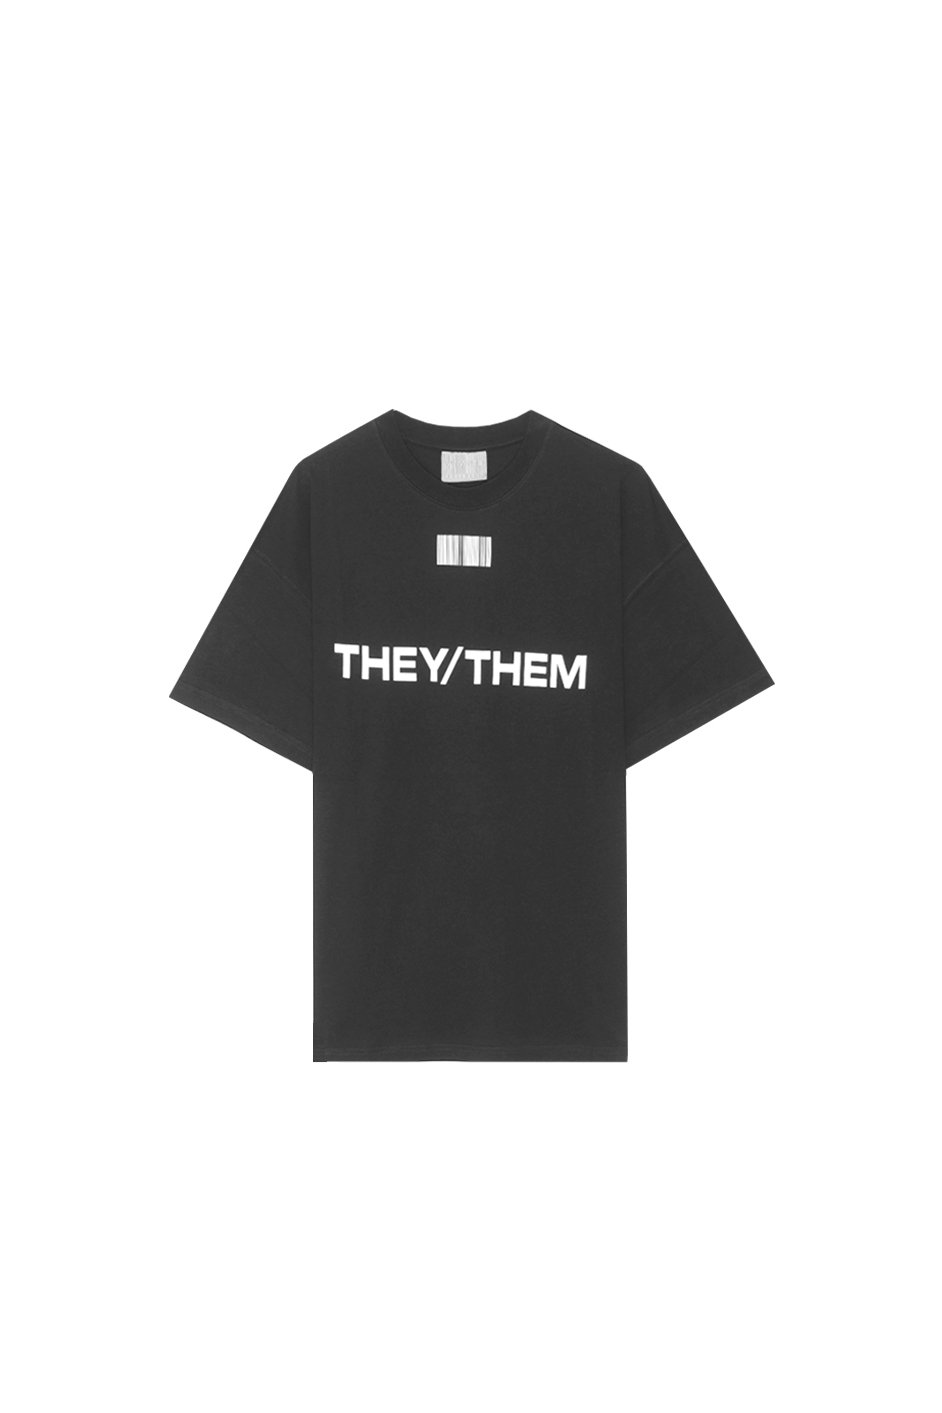 THEY/THEM T-SHIRT